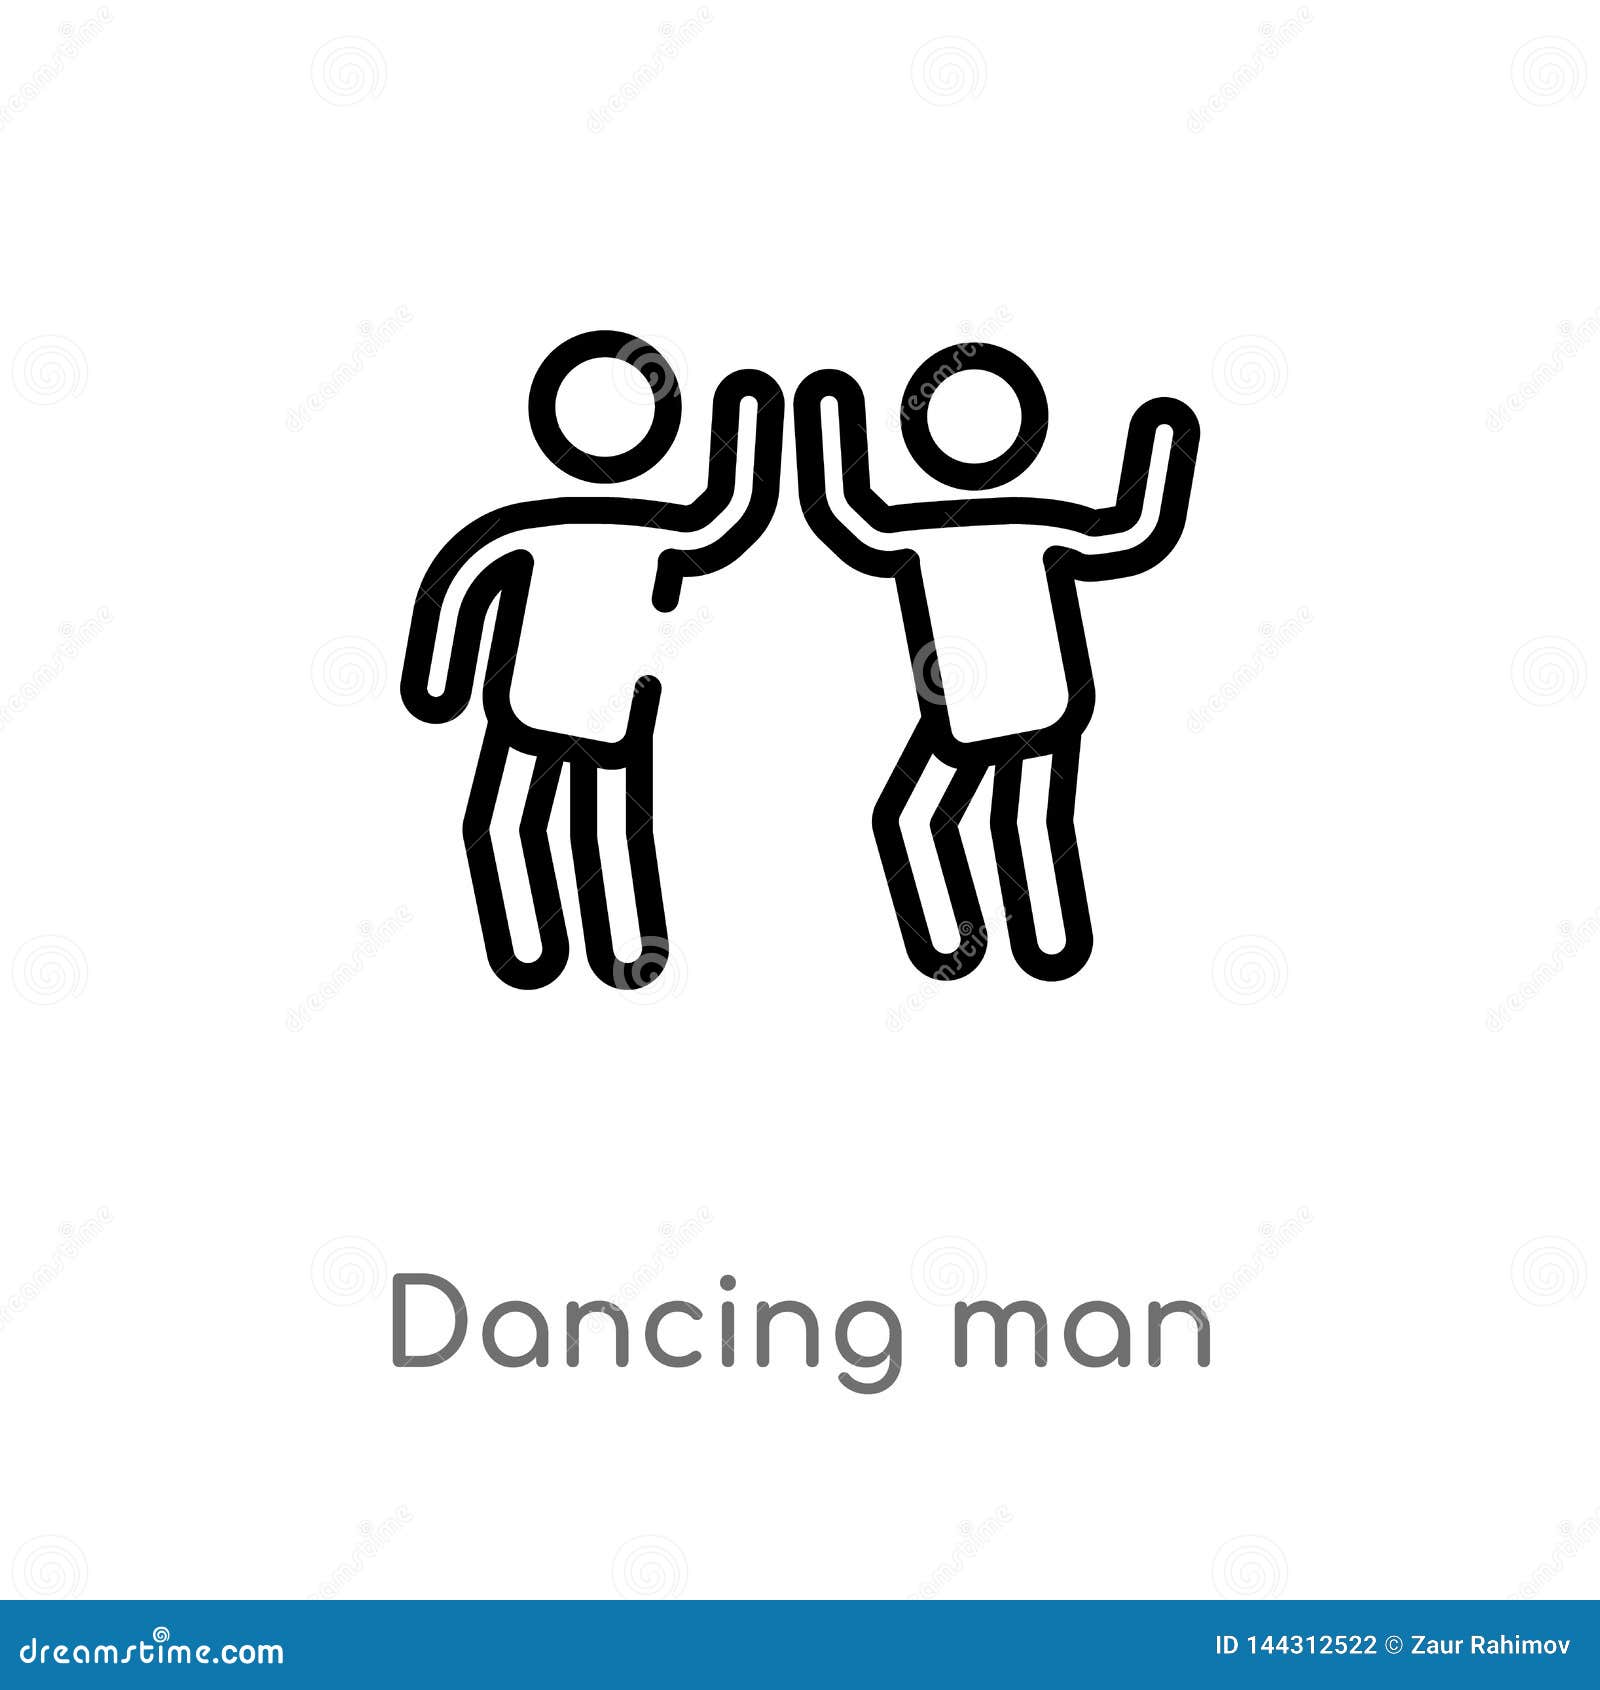 Outline Dancing Man Vector Icon Isolated Black Simple Line Element Illustration From People Concept Editable Vector Stroke Stock Vector Illustration Of Icon Couple 144312522 Dancing icon vector png collections download alot of images for dancing icon vector download free with high dancing icon vector free png stock. https www dreamstime com outline dancing man vector icon isolated black simple line element illustration people concept editable stroke white image144312522